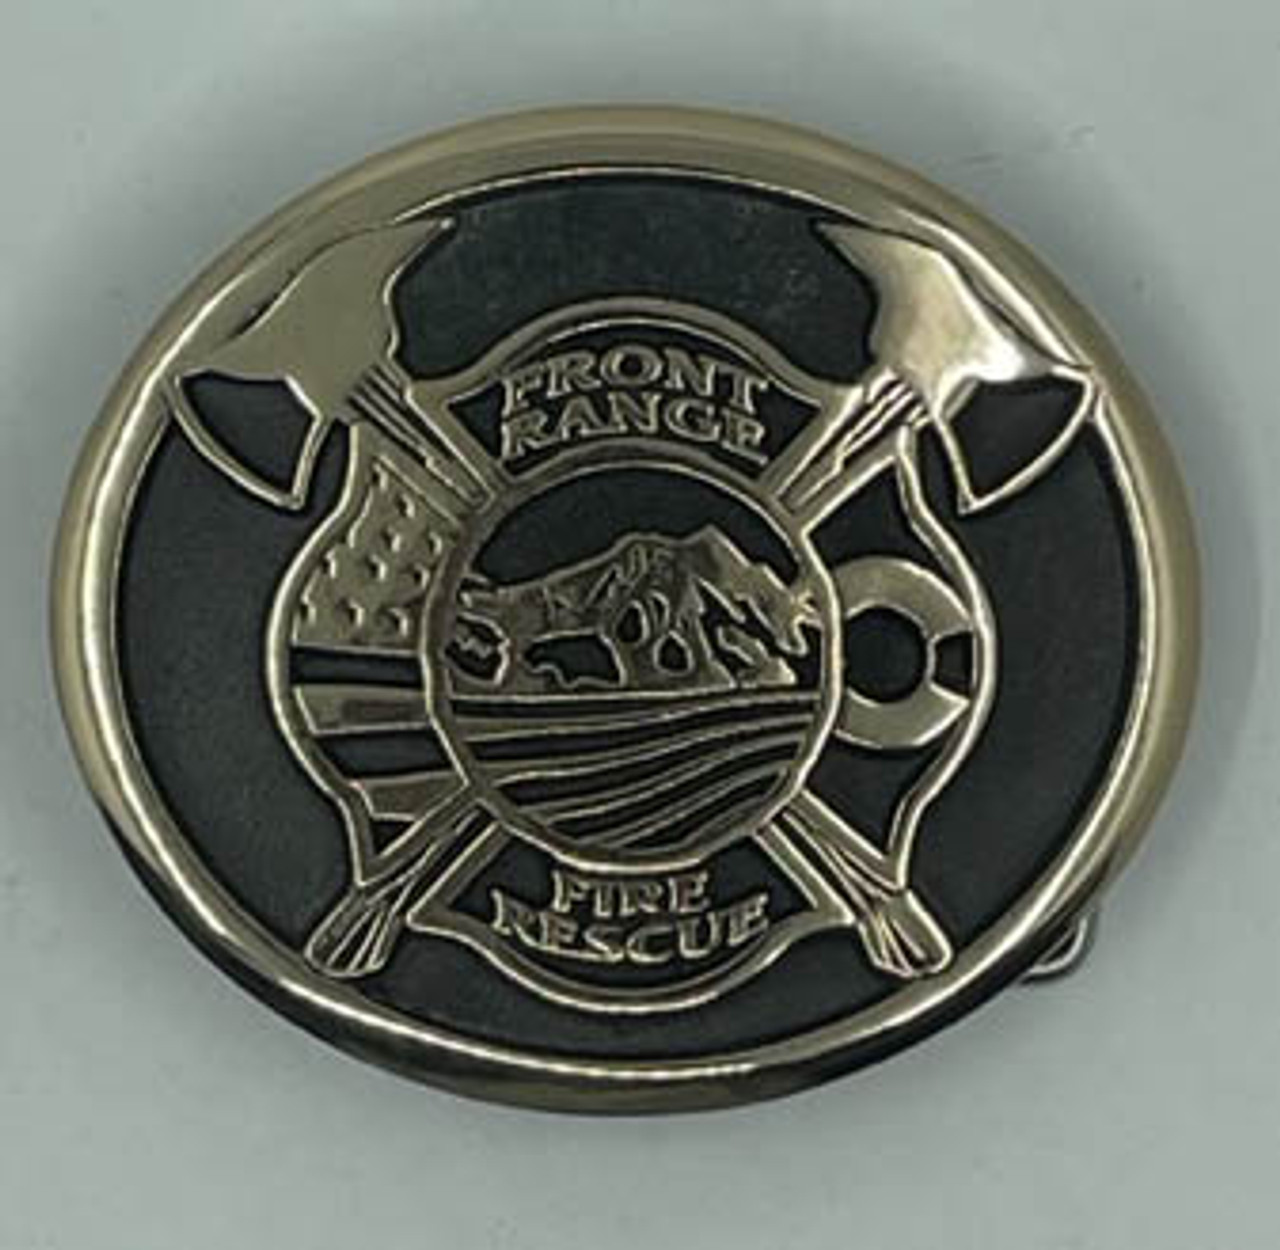 Front Range Fire Rescue Buckle (RESTRICTED)